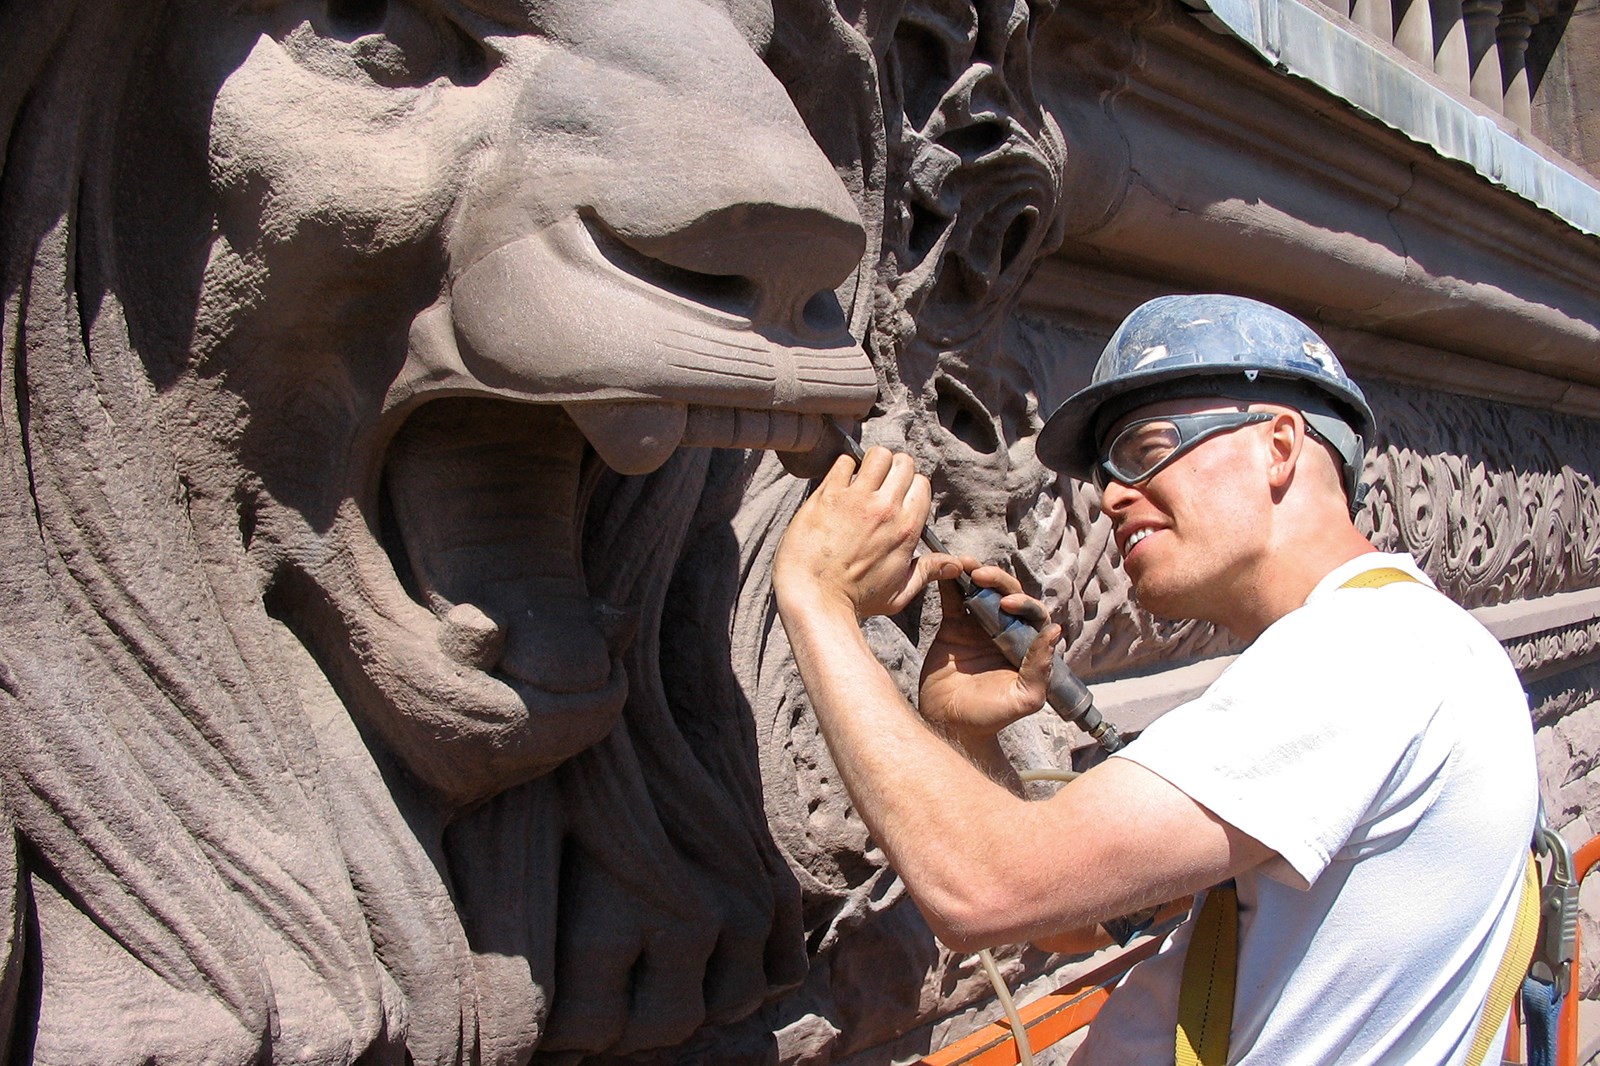 Mr. Smith repairs an ornamental lion on the façade of the Legislative Assembly of Ontario at Queen’s Park in Toronto. (Photo credit: John-Philippe Smith)